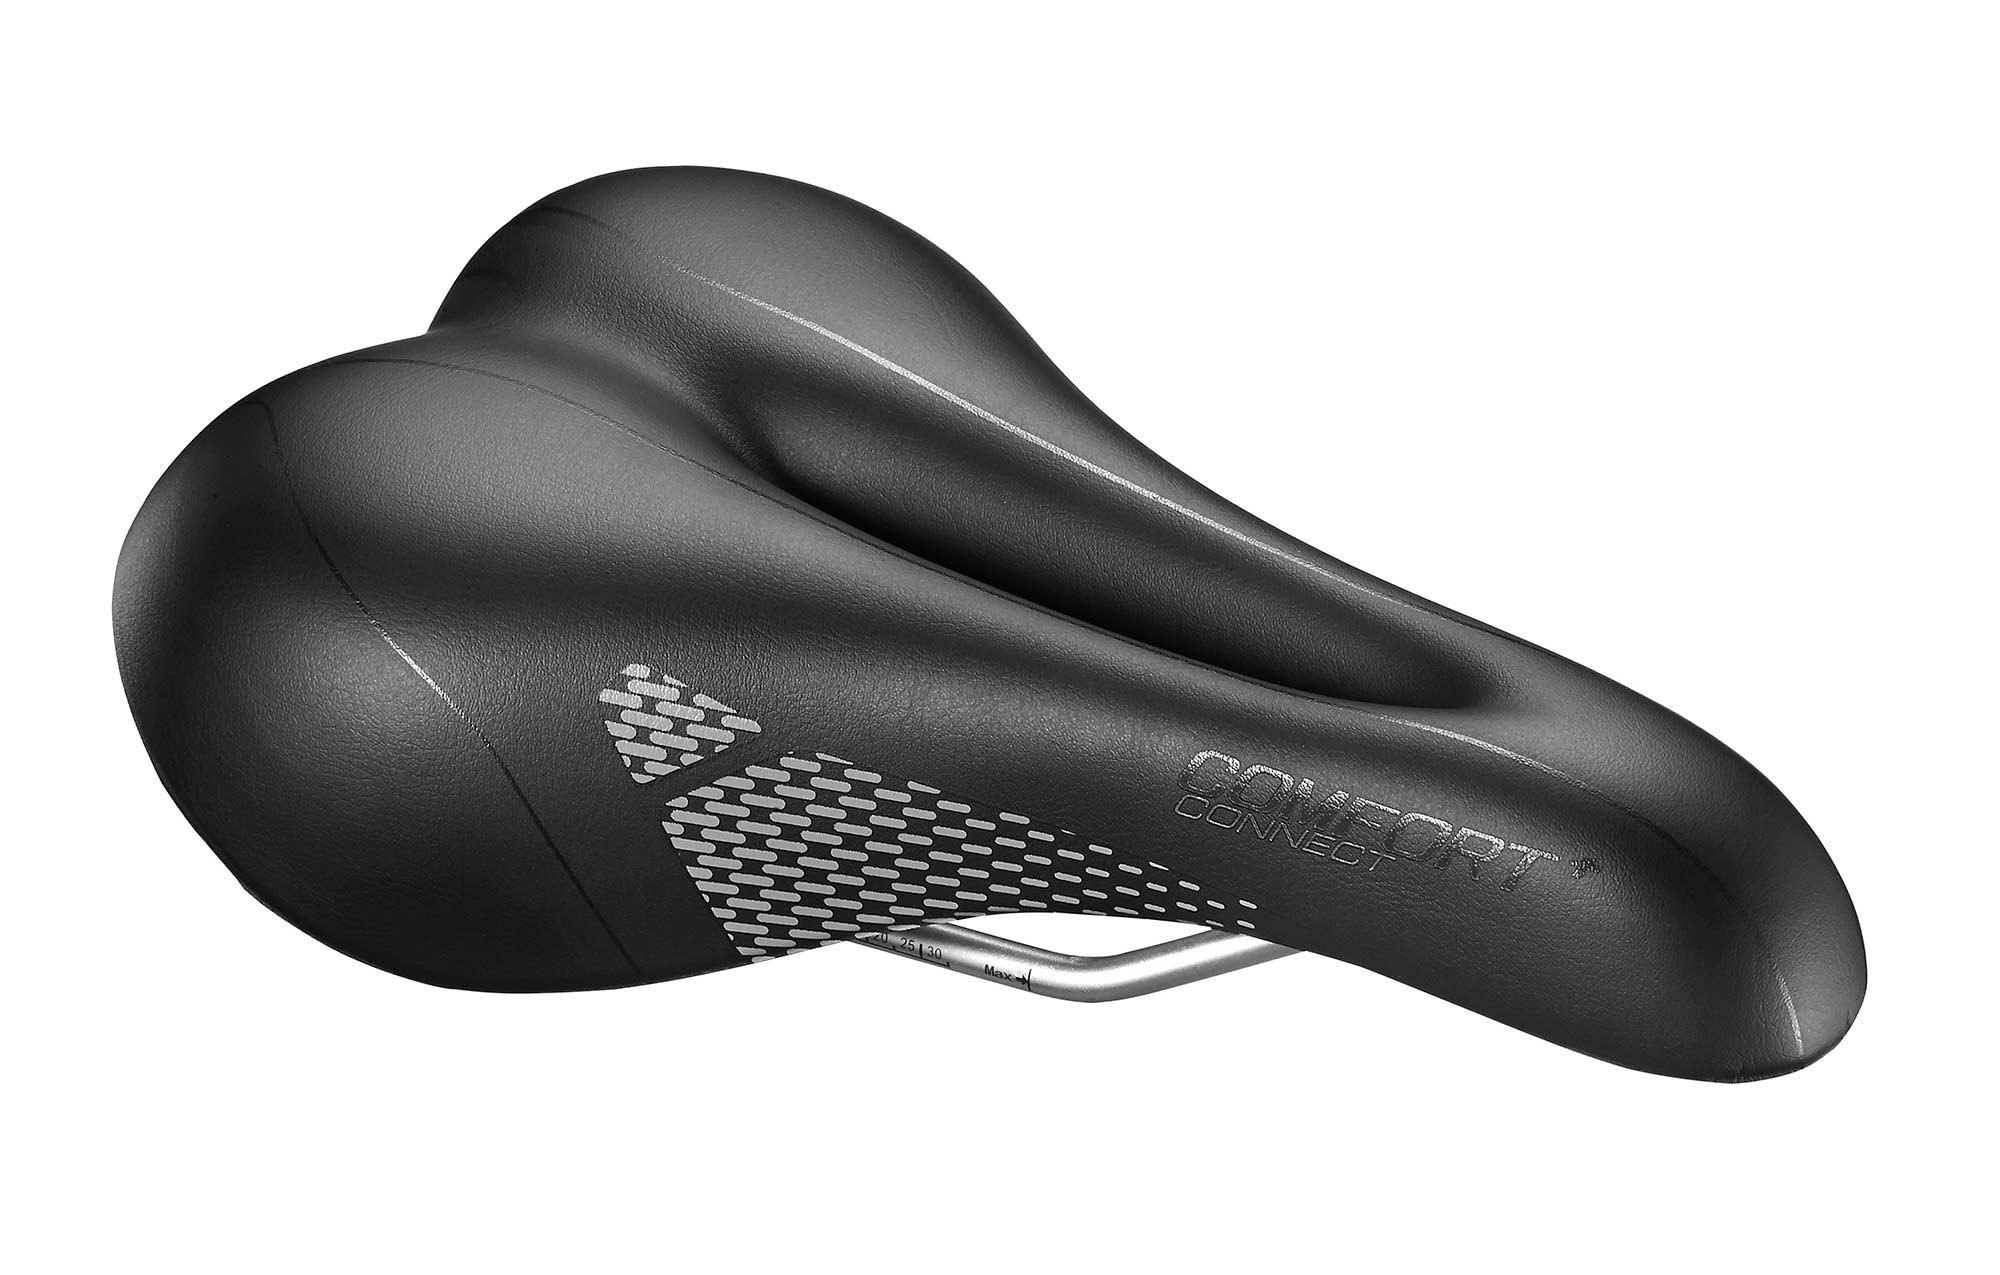 Giant Connect Comfort+ Saddle